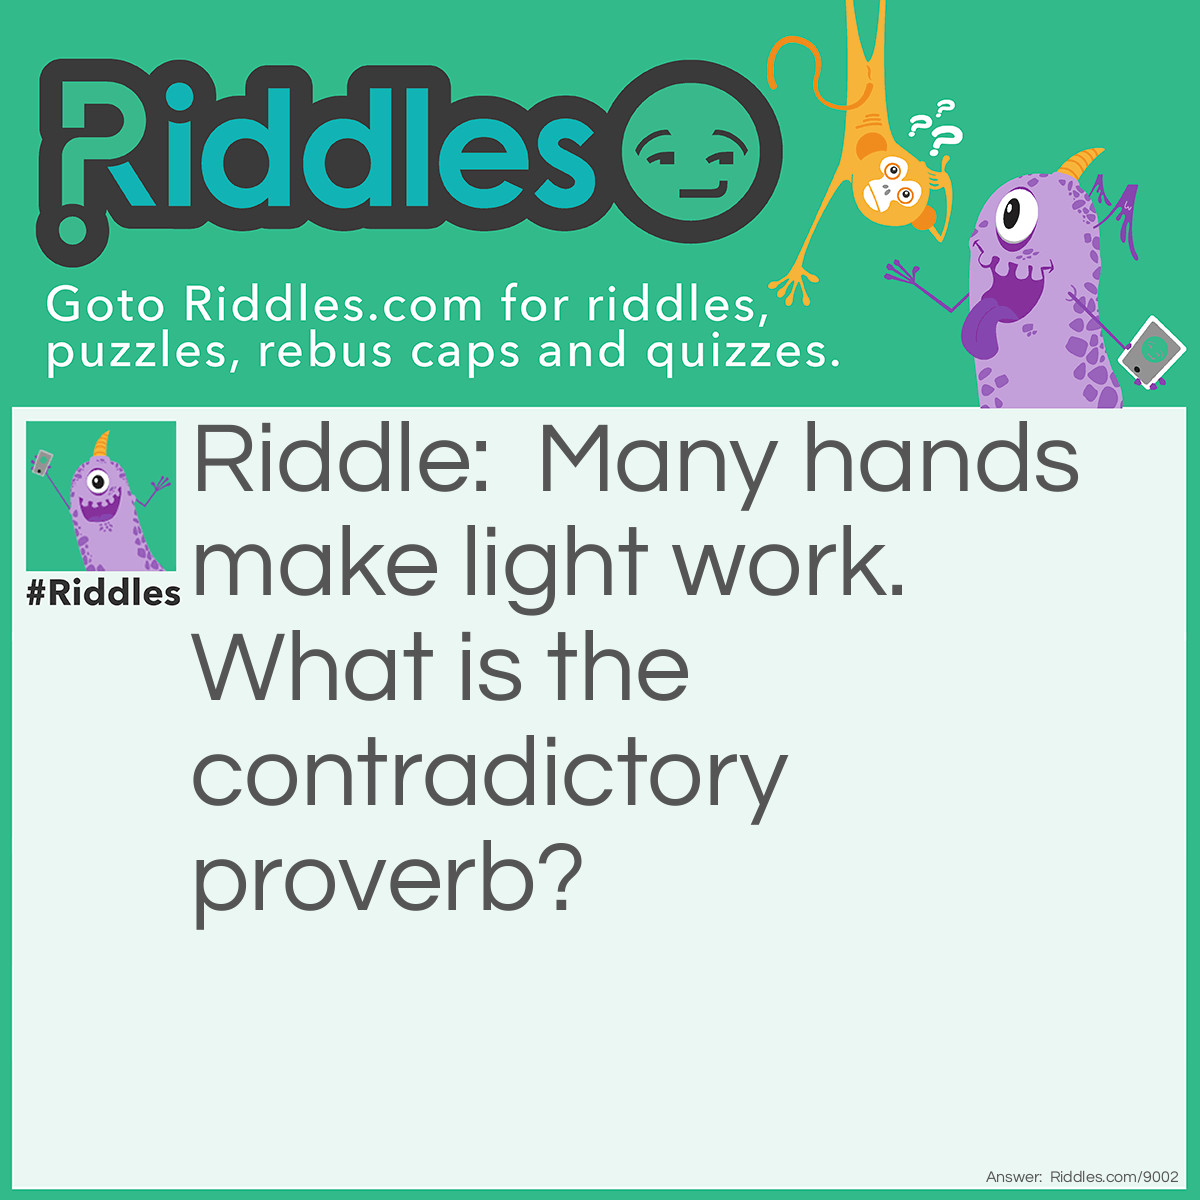 Riddle: Many hands make light work. What is the contradictory proverb? Answer: Too many cooks spoil the broth.